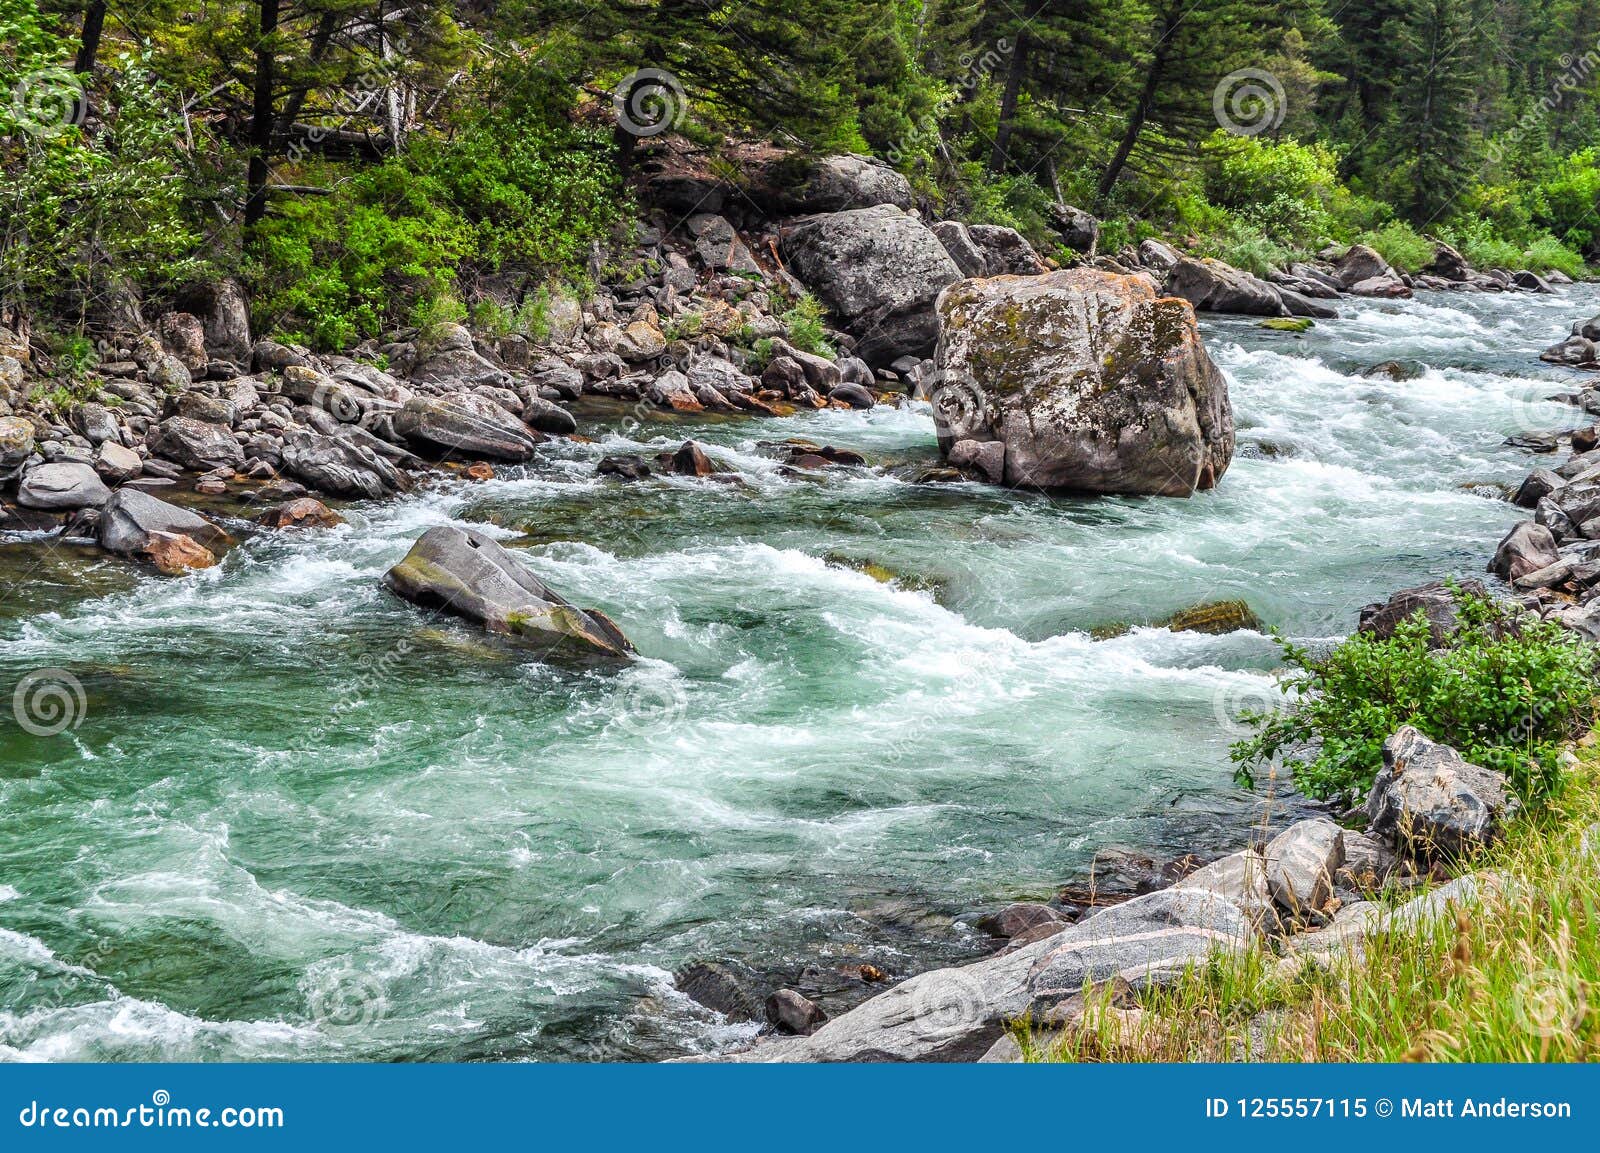 rushing rapids of the gallatin river